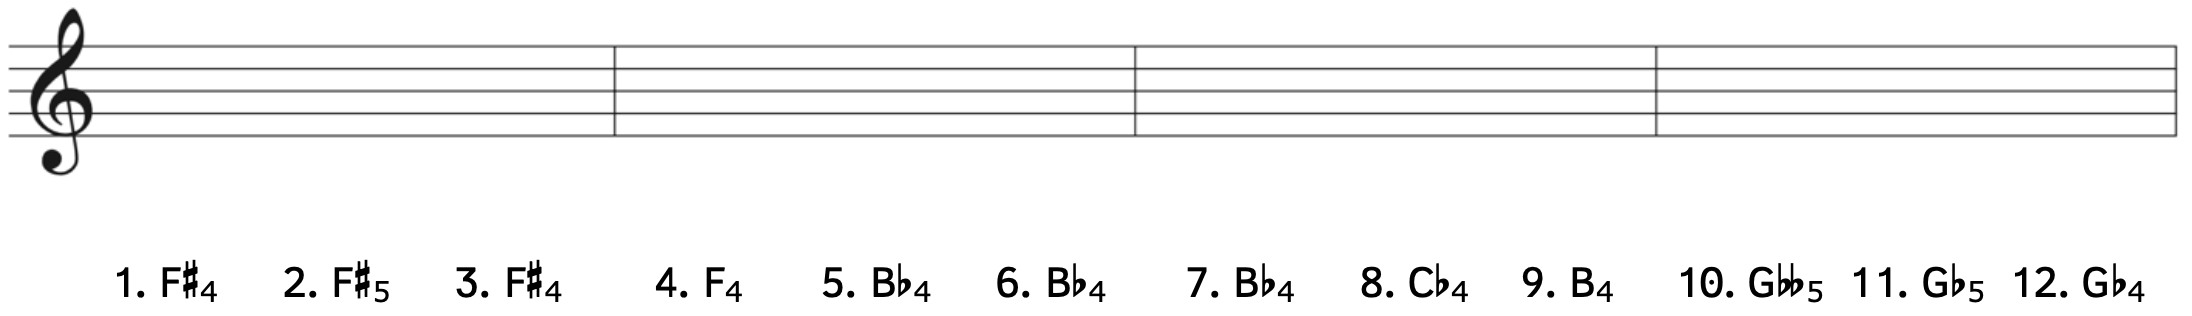 Exercise to write pitches with accidentals on a staff. The given clef is treble clef. Number 1 asks for F-sharp4. Number 2 asks for F-sharp5. Number3 asks for F-sharp4. There is a bar line. Number 4 asks for F4. Number 5 asks for B-flat4. Number 6 asks for B-flat4. There is a bar line. Number 7 asks for B-flat4. Number 8 asks for C-flat4. Number 9 asks for B4. There is a bar line. Number 10 asks for G-double flat5. Number 11 asks for G-flat5. Number 12 asks for G-flat4.